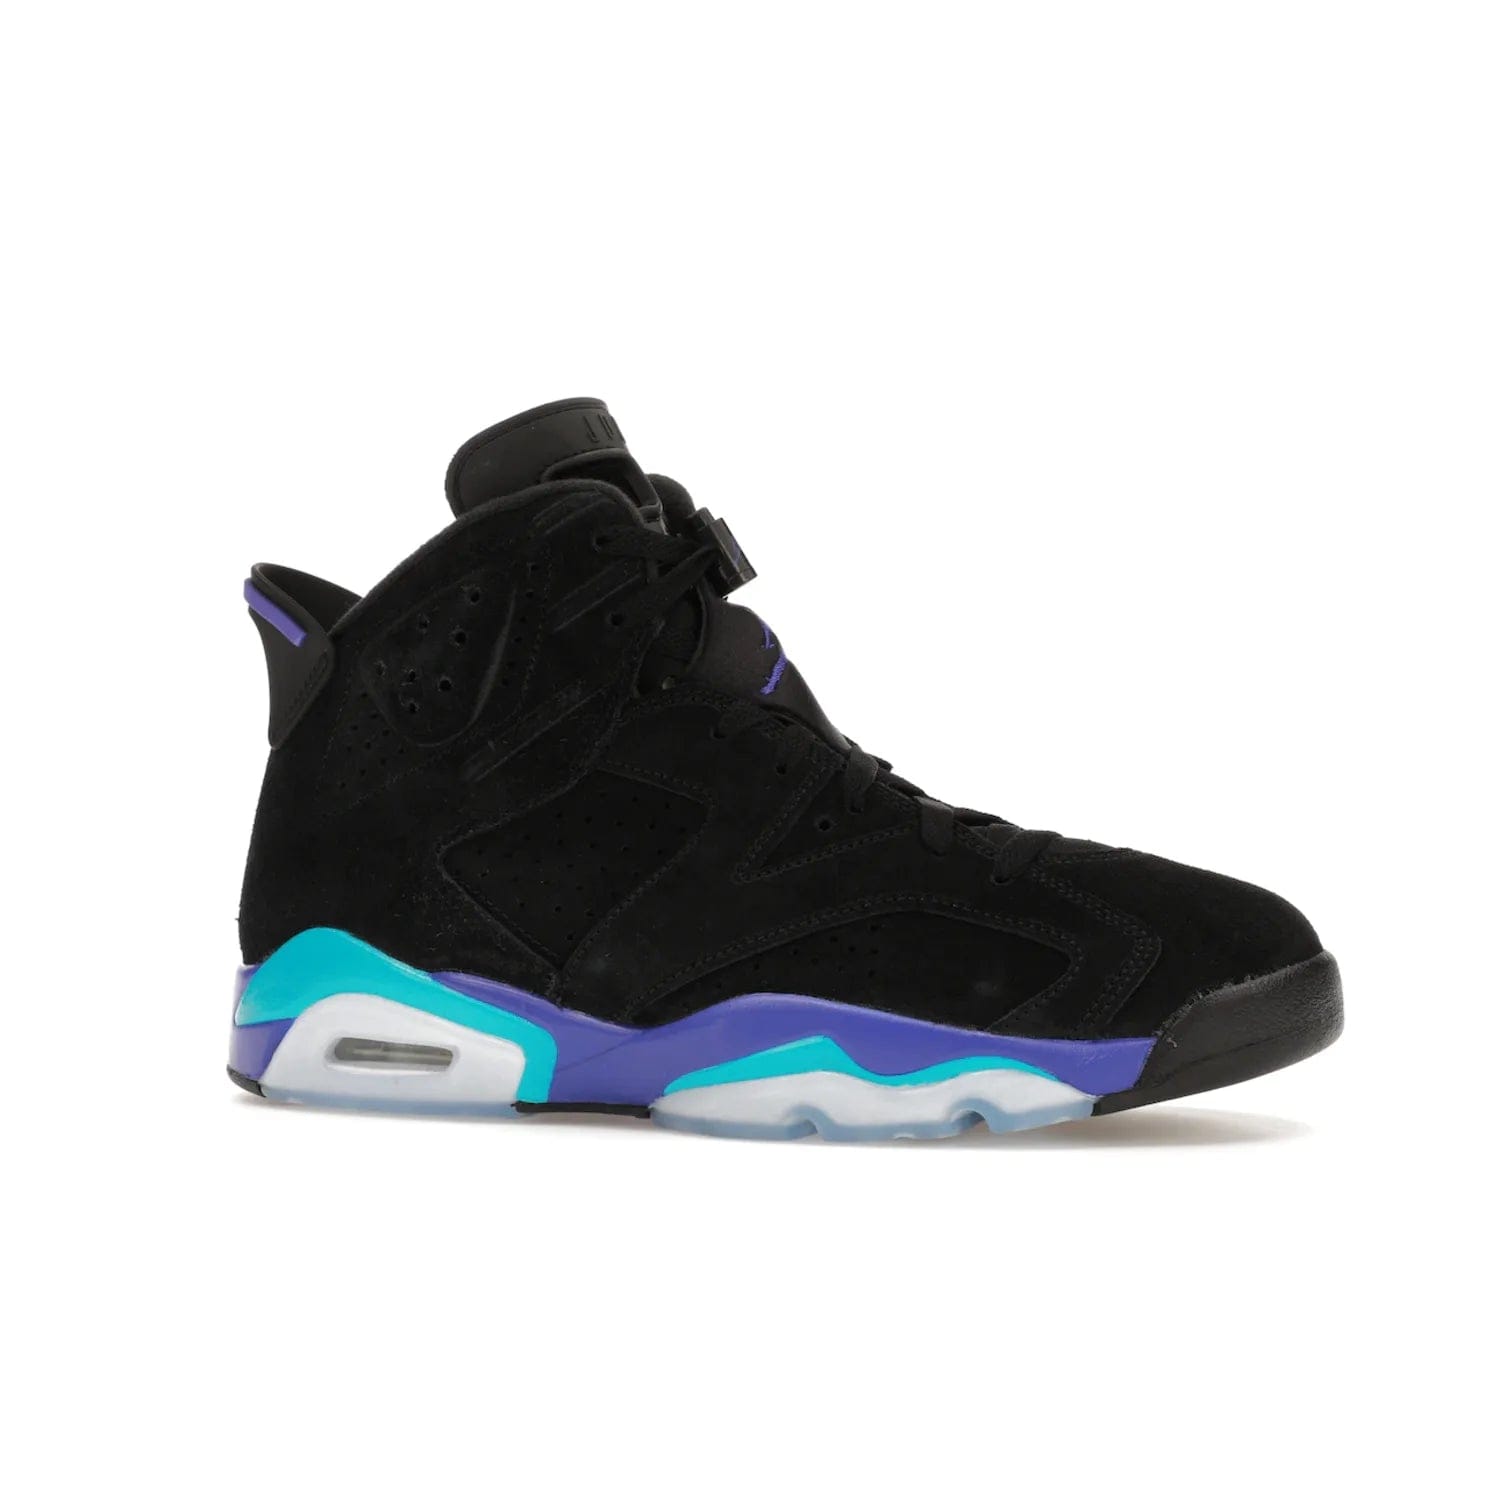 Jordan 6 Retro Aqua - Image 3 - Only at www.BallersClubKickz.com - Feel the classic Jordan 6 Retro Aqua paired with modern style. Black, Bright Concord, and Aquatone hues are crafted with a supple suede and rubberized heel tab. This standout sneaker adds signature Jordan elements at $200. Elevate your style with the Jordan 6 Retro Aqua.